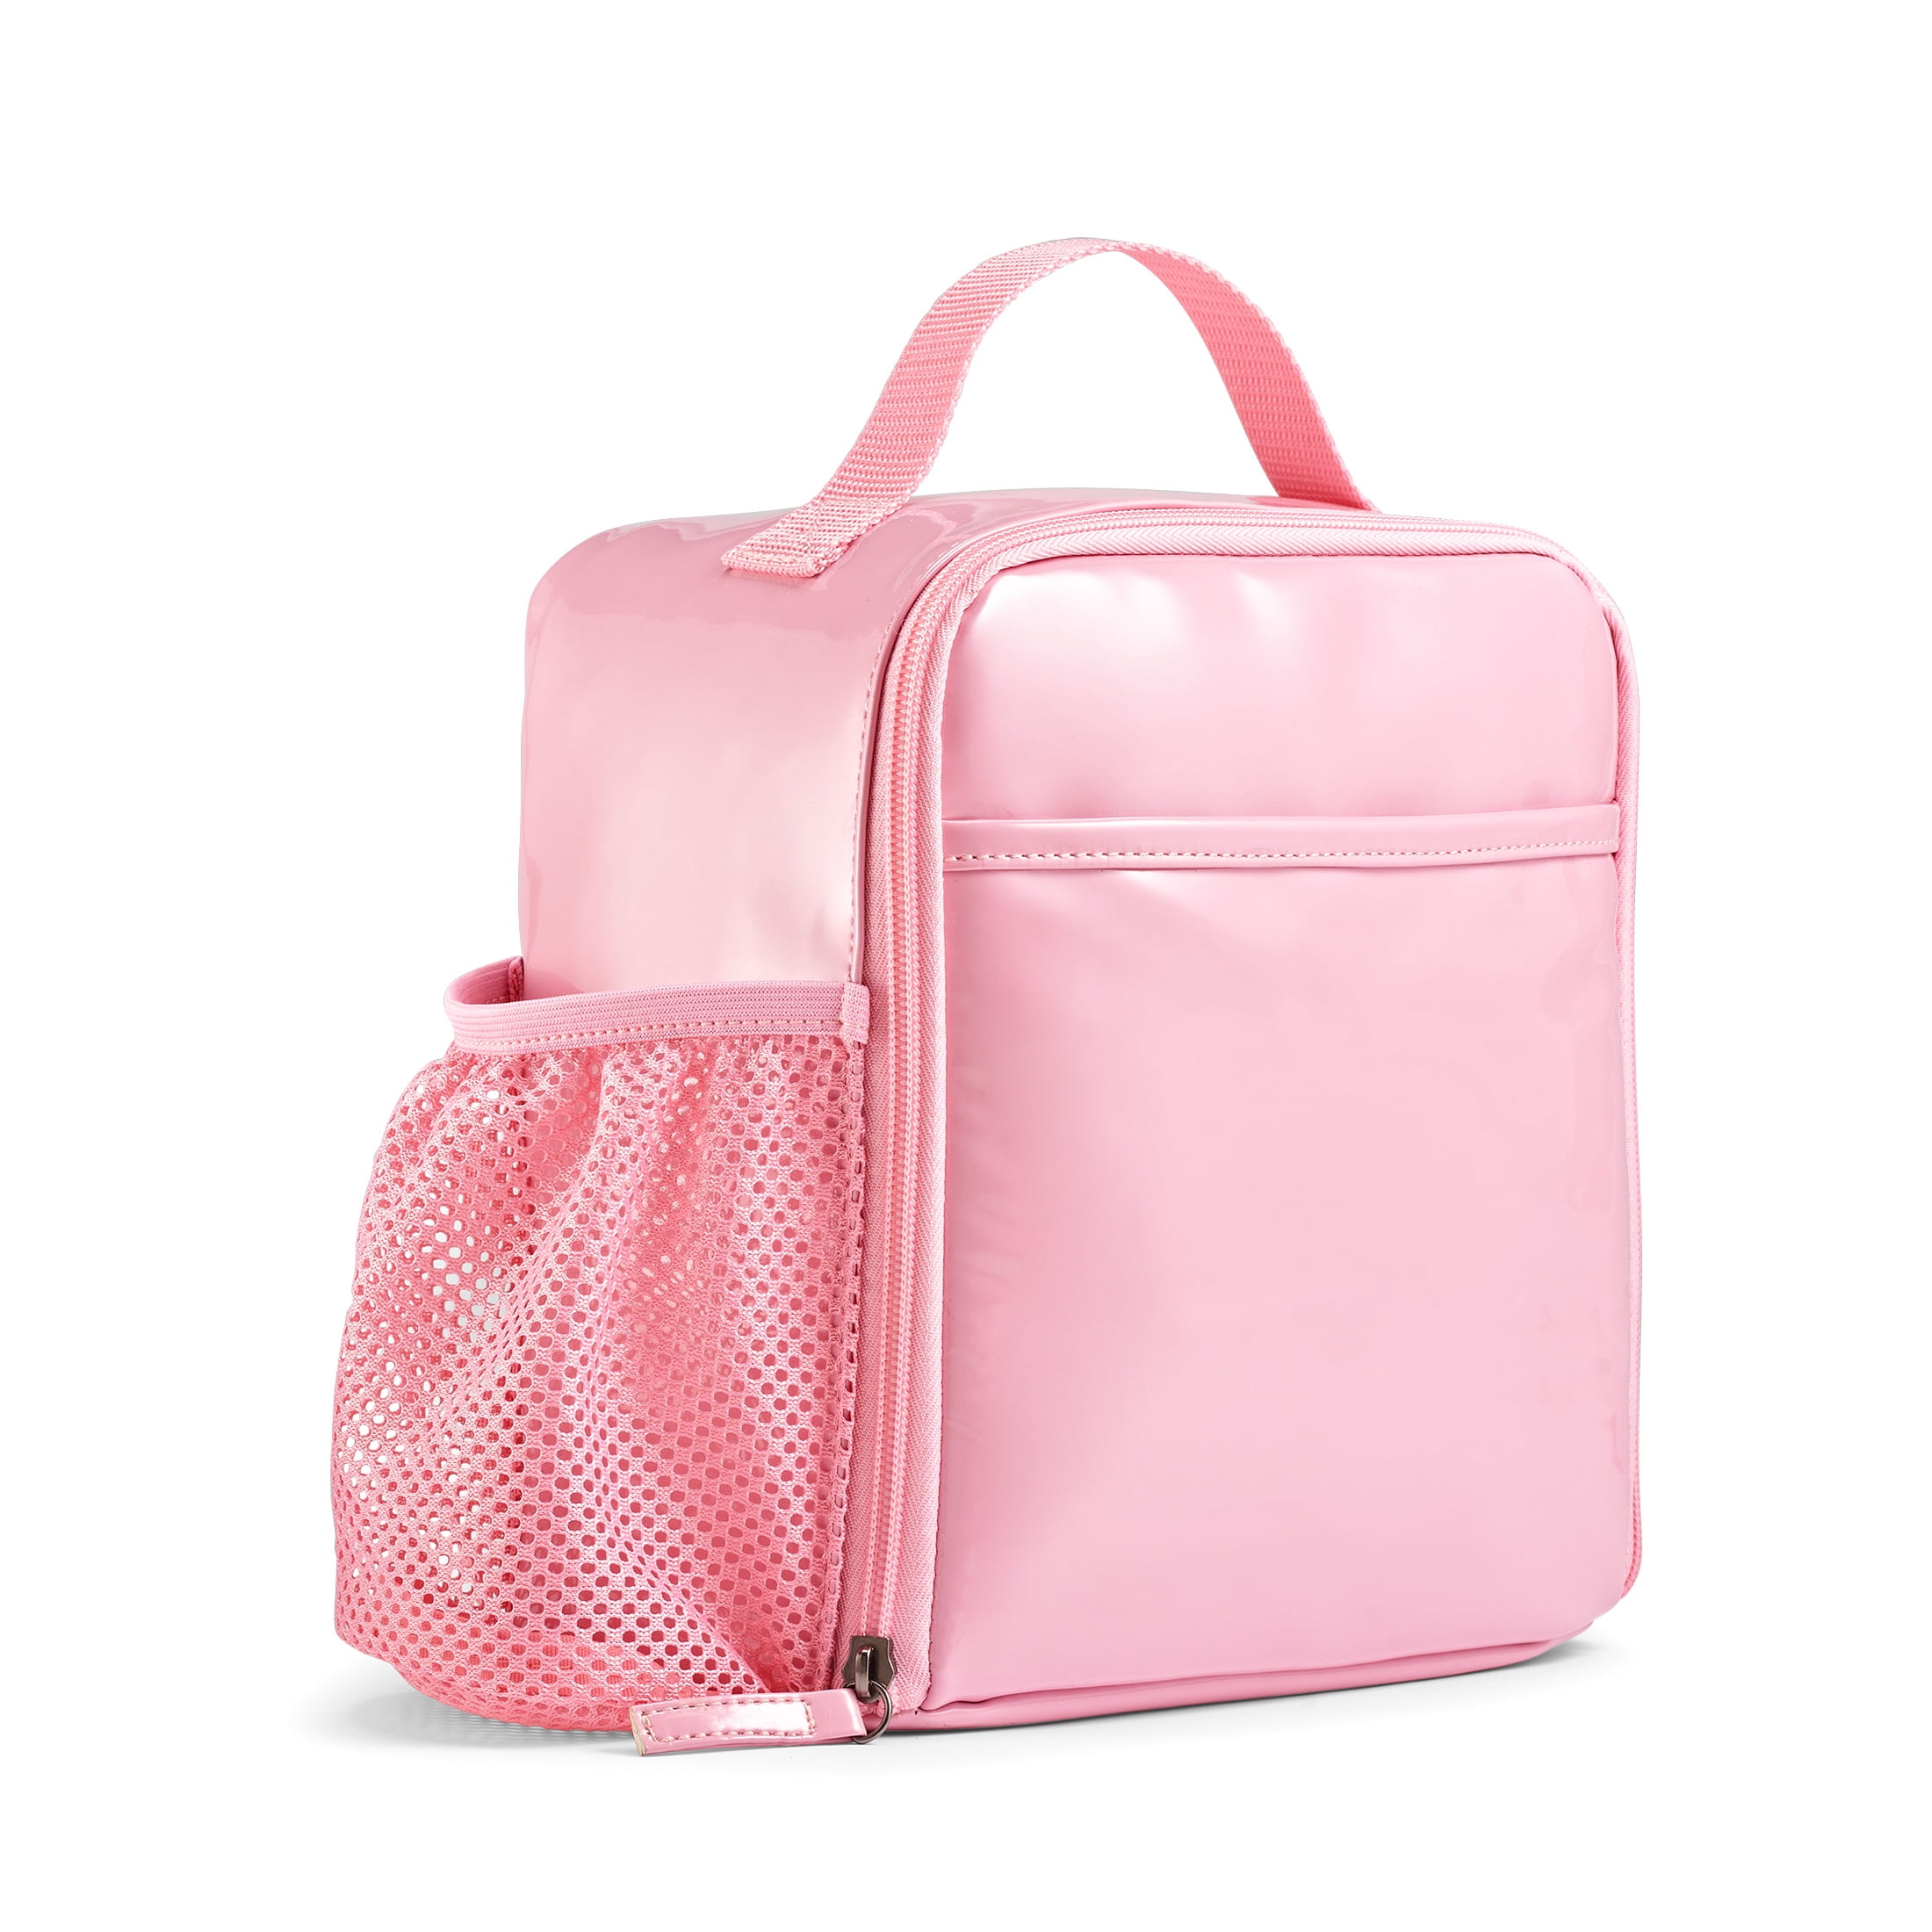 Lifewit Lunch Box, Pink, Unisex, Fabric Material, 10.2 x 7.1 x 4.3 Inches,  630g